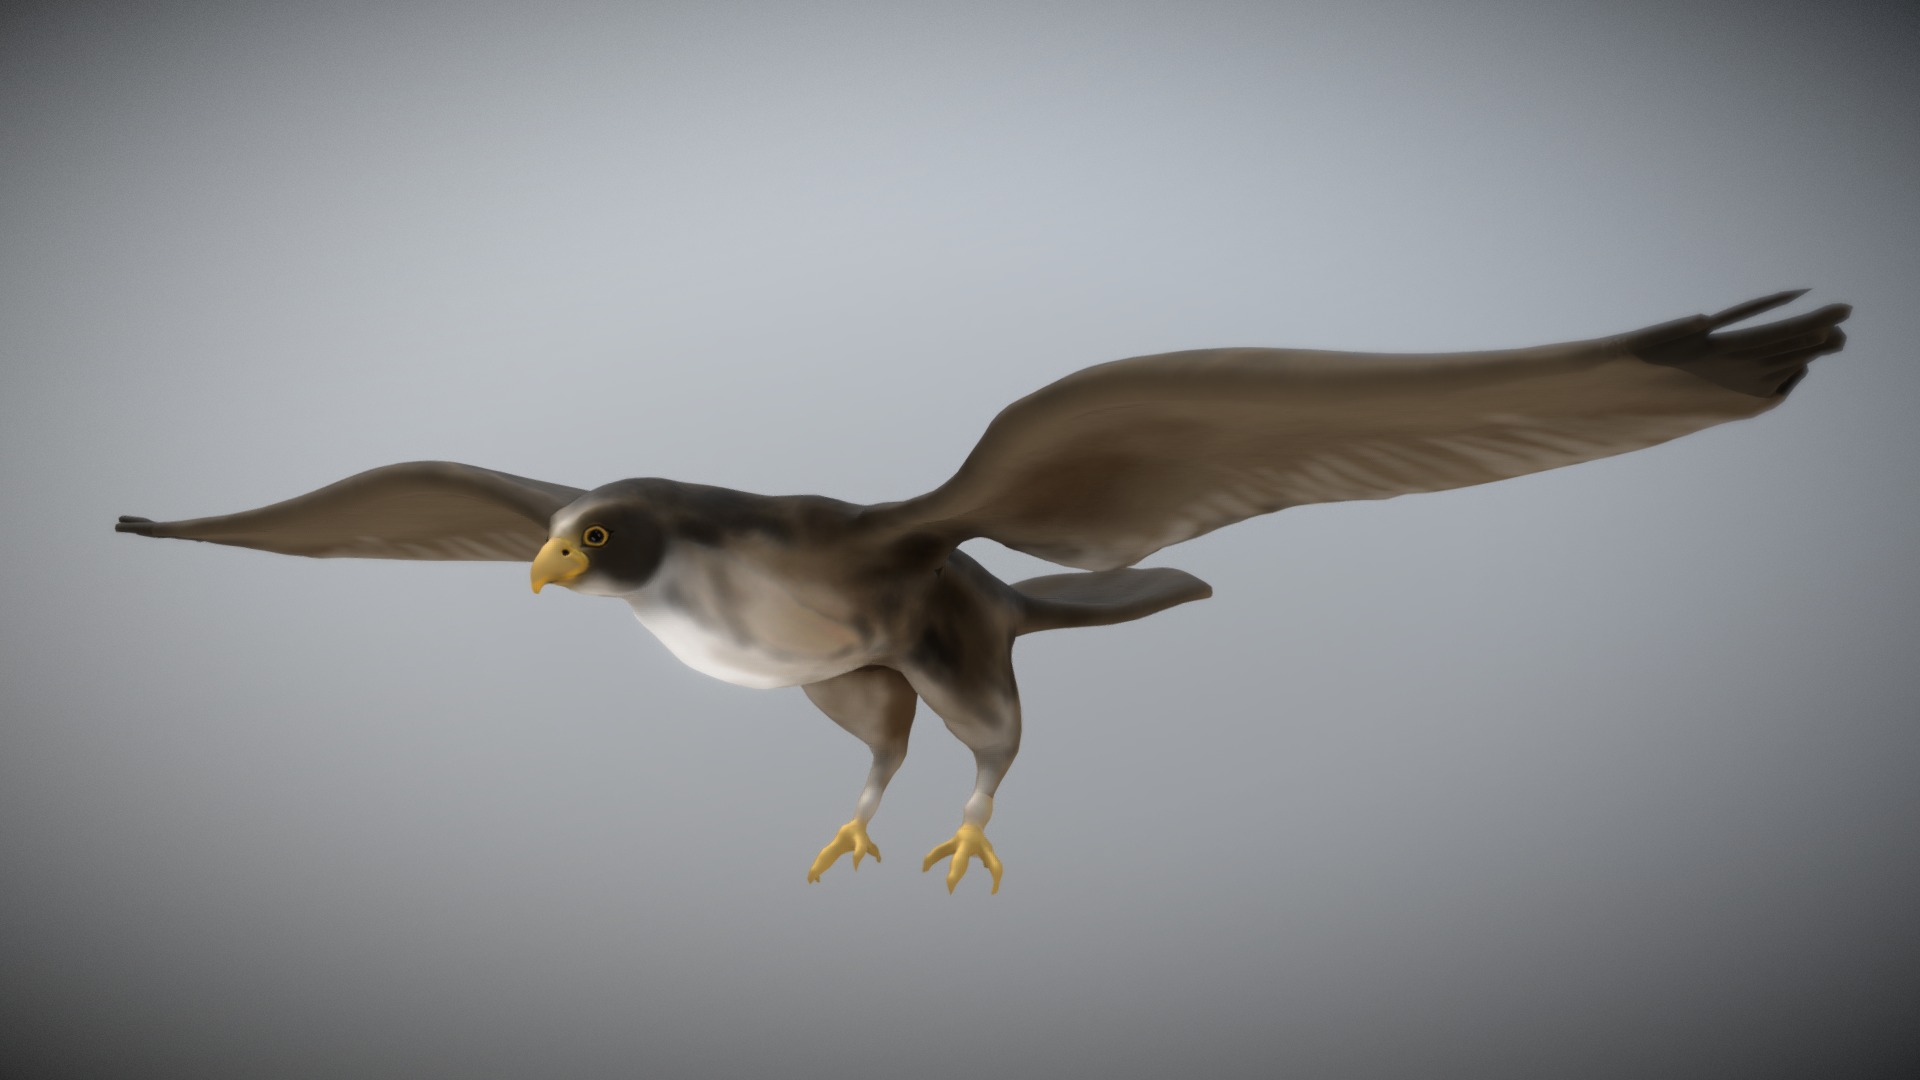 3D model Falcon - This is a 3D model of the Falcon. The 3D model is about a bird flying in the sky.